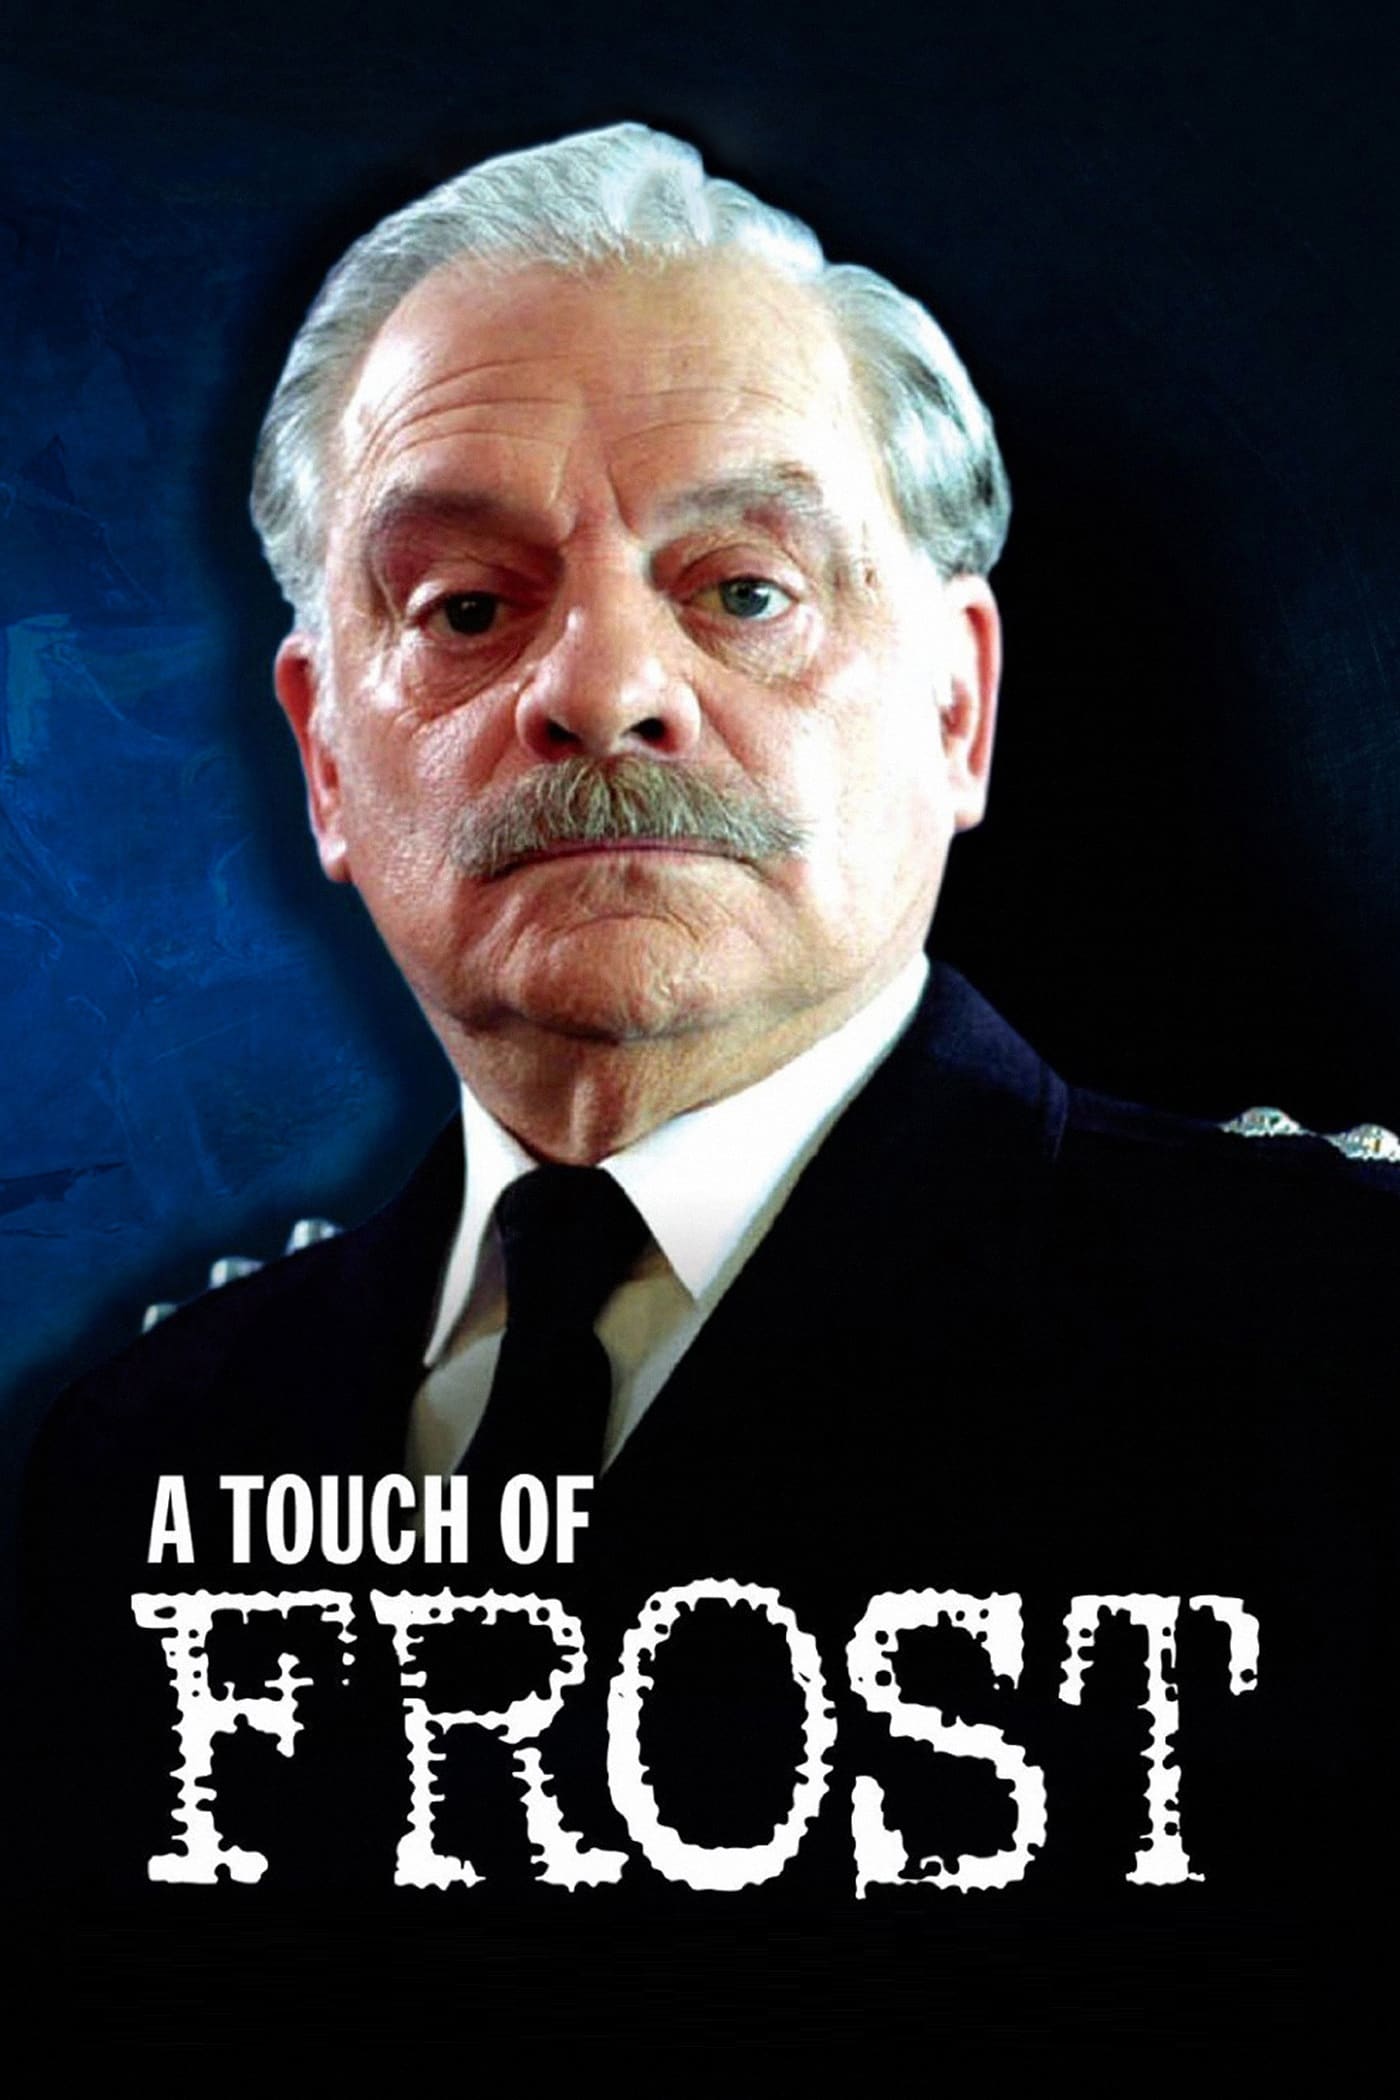 A Touch of Frost (1992)